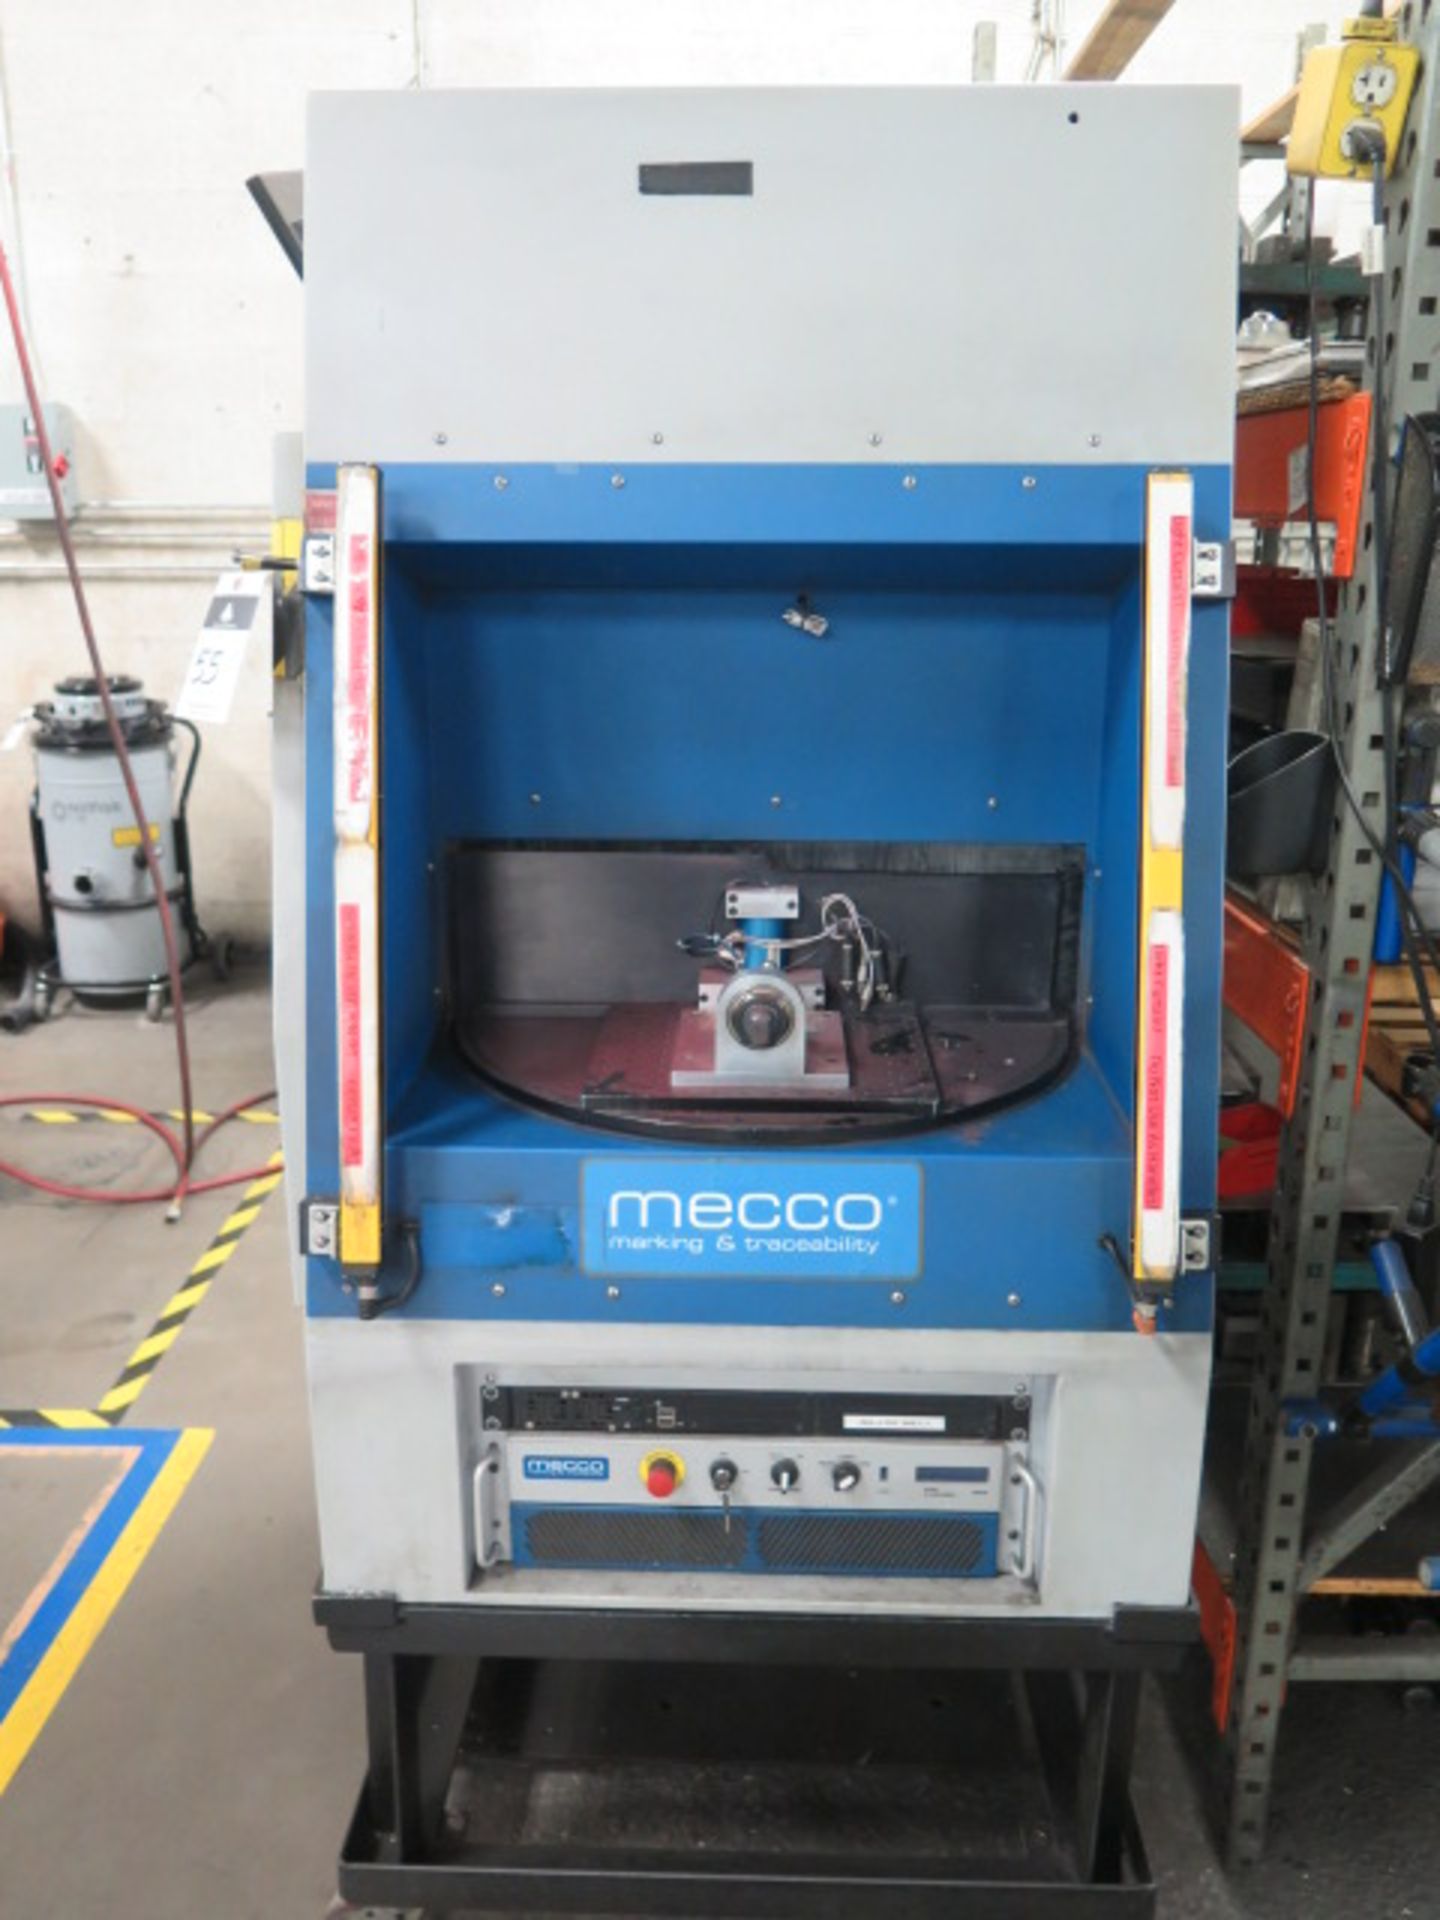 2014 Mecco Marking and Traceability “WinLase LEC-1 MeccoMark” 20kWFiber Laser Marking, SOLD AS IS - Image 2 of 10